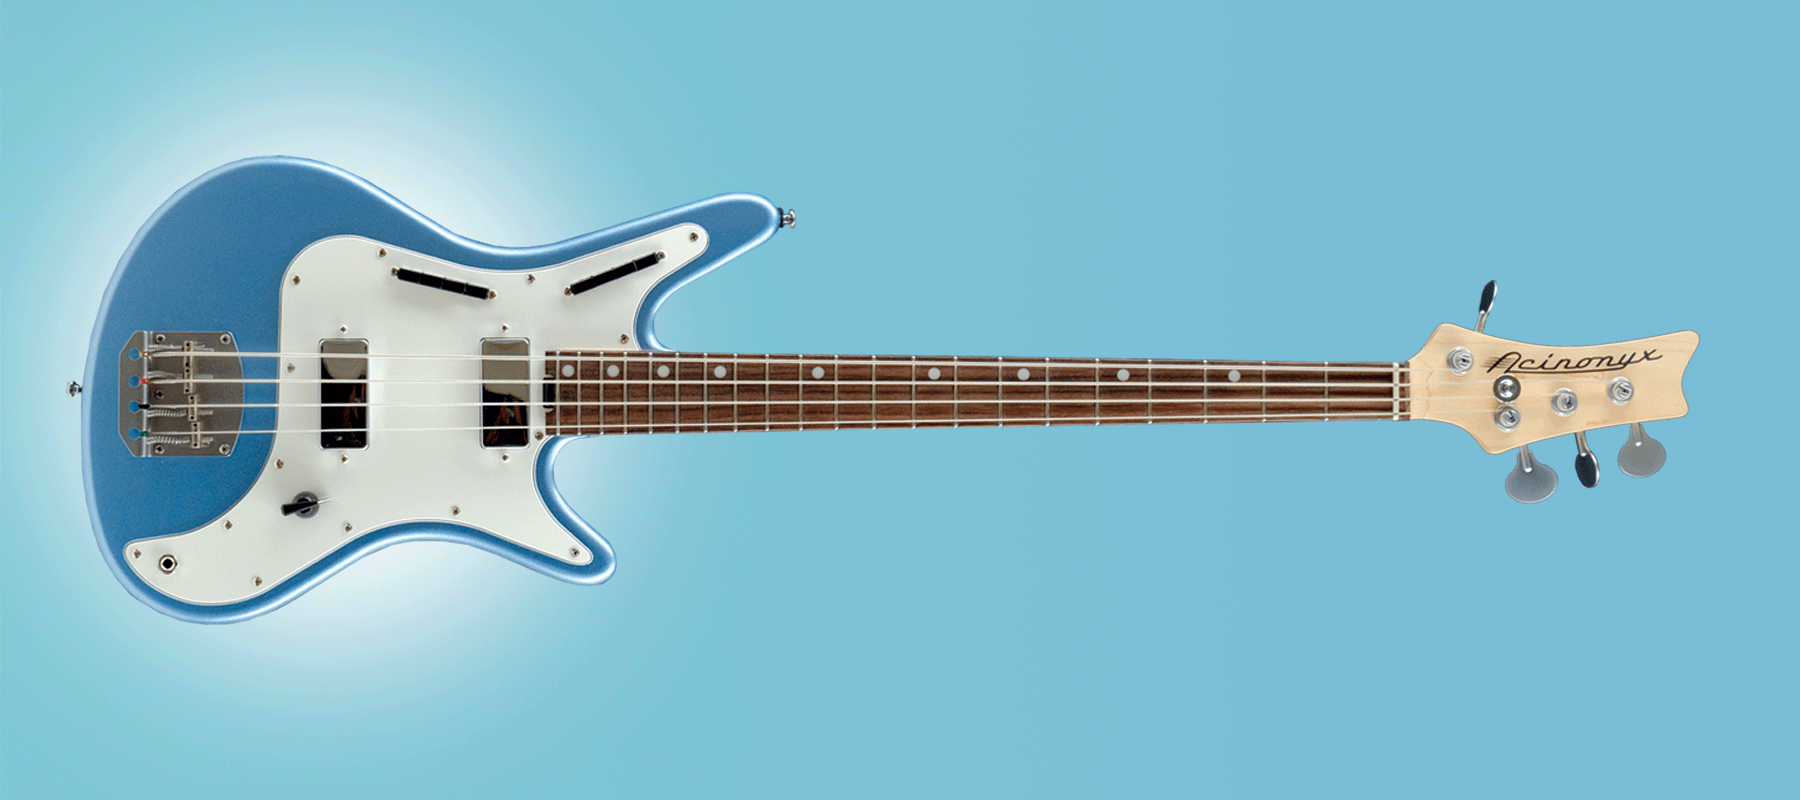 Overhead view of the Nordstrand Acinonyx Bass with a blue finish